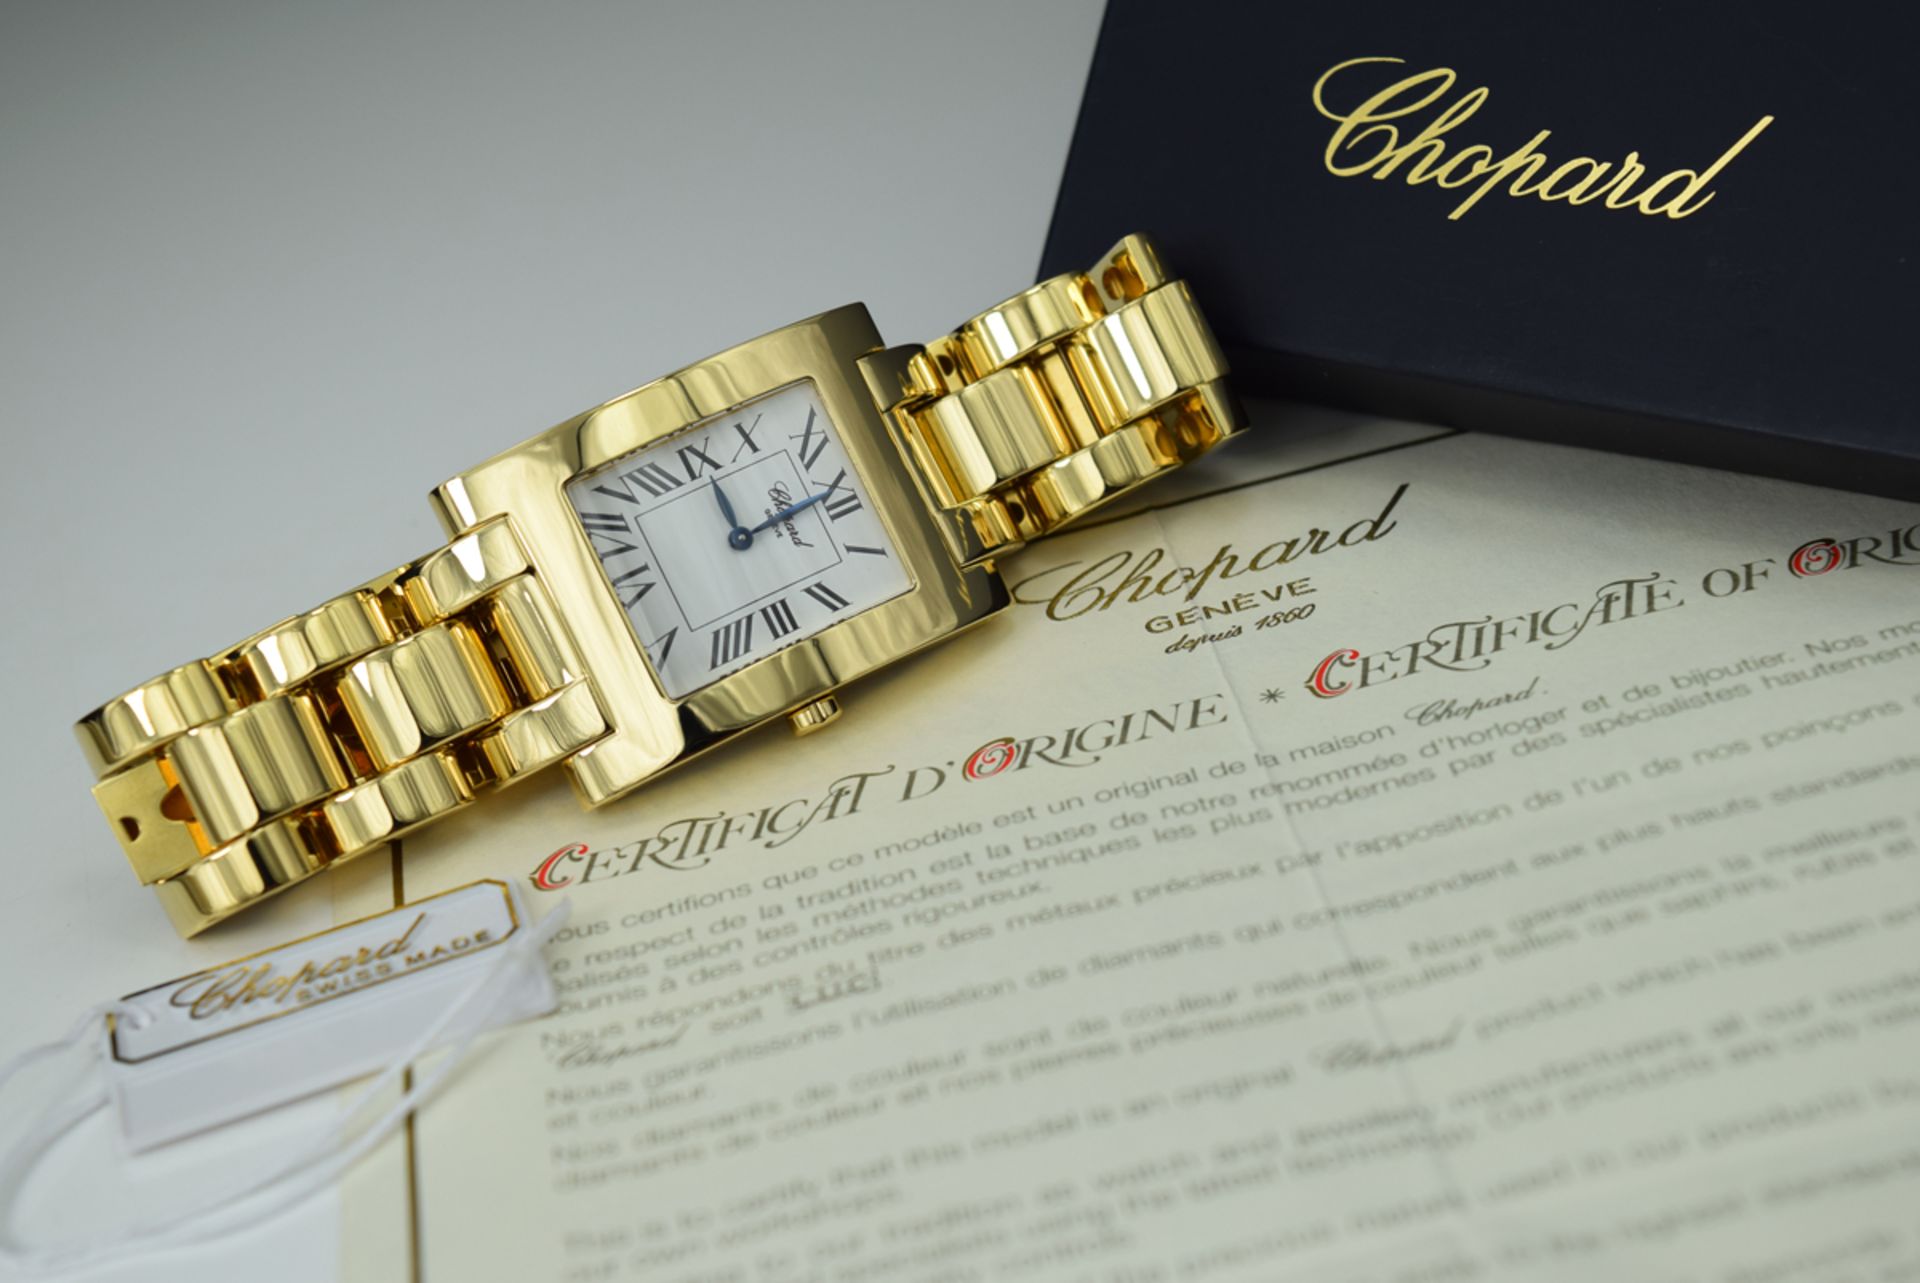 ❖ CHOPARD ❖ – CLASSIC 'HOUR' XL in 18k SOLID GOLD! XL SIZE (40mm x 30mm) BOX AND PAPERS! - Image 4 of 14